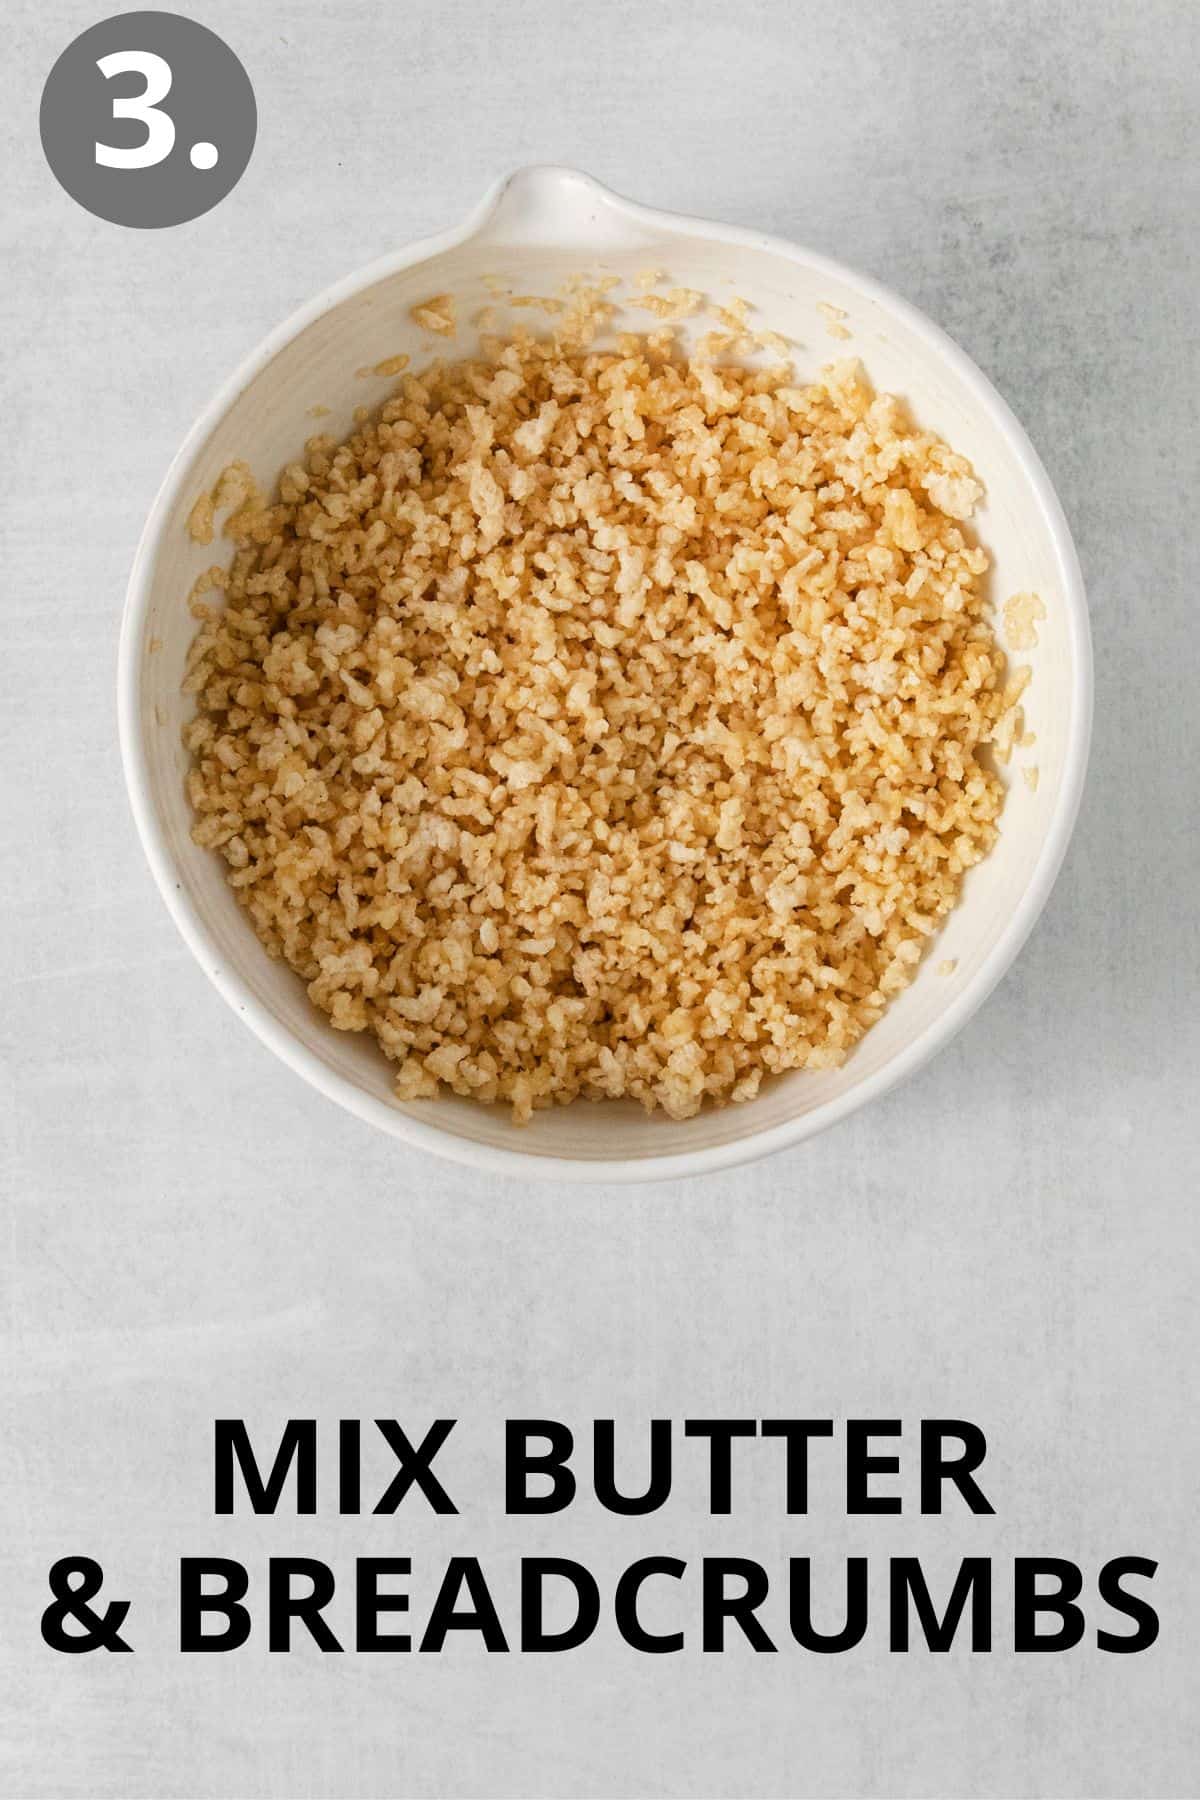 Butter and breadcrumbs in a bowl